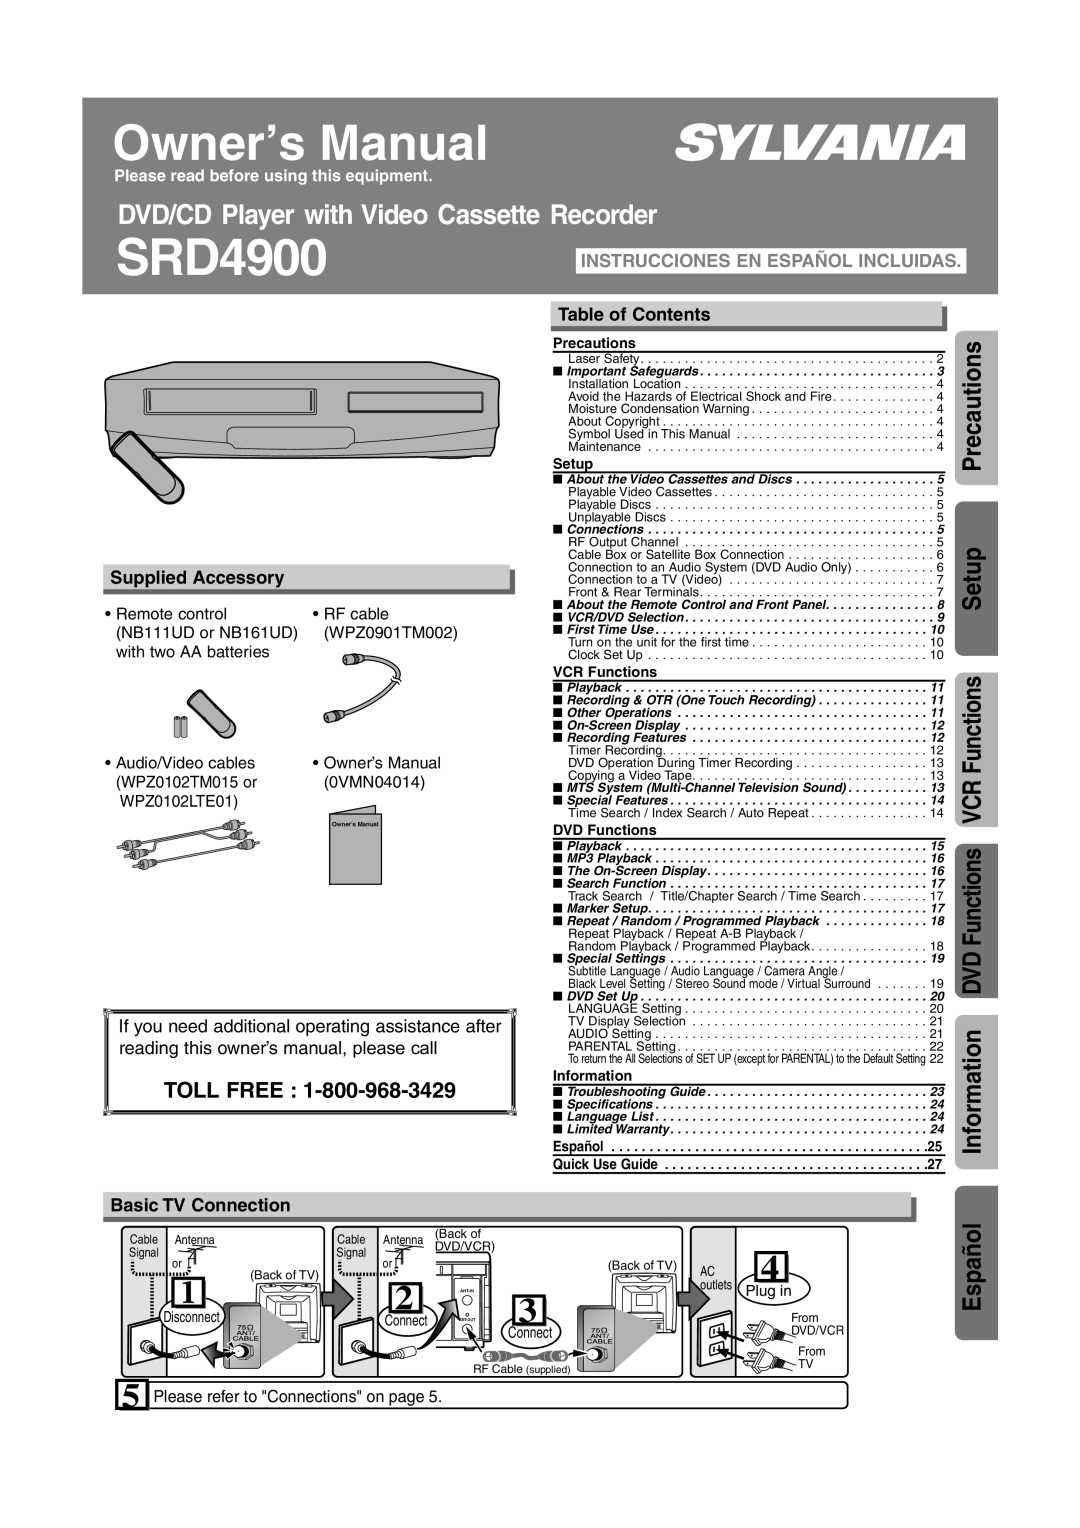 Sylvania SRD4900 owner manual Setup, Toll Free, Supplied Accessory, Table of Contents, Basic TV Connection, Remote control 